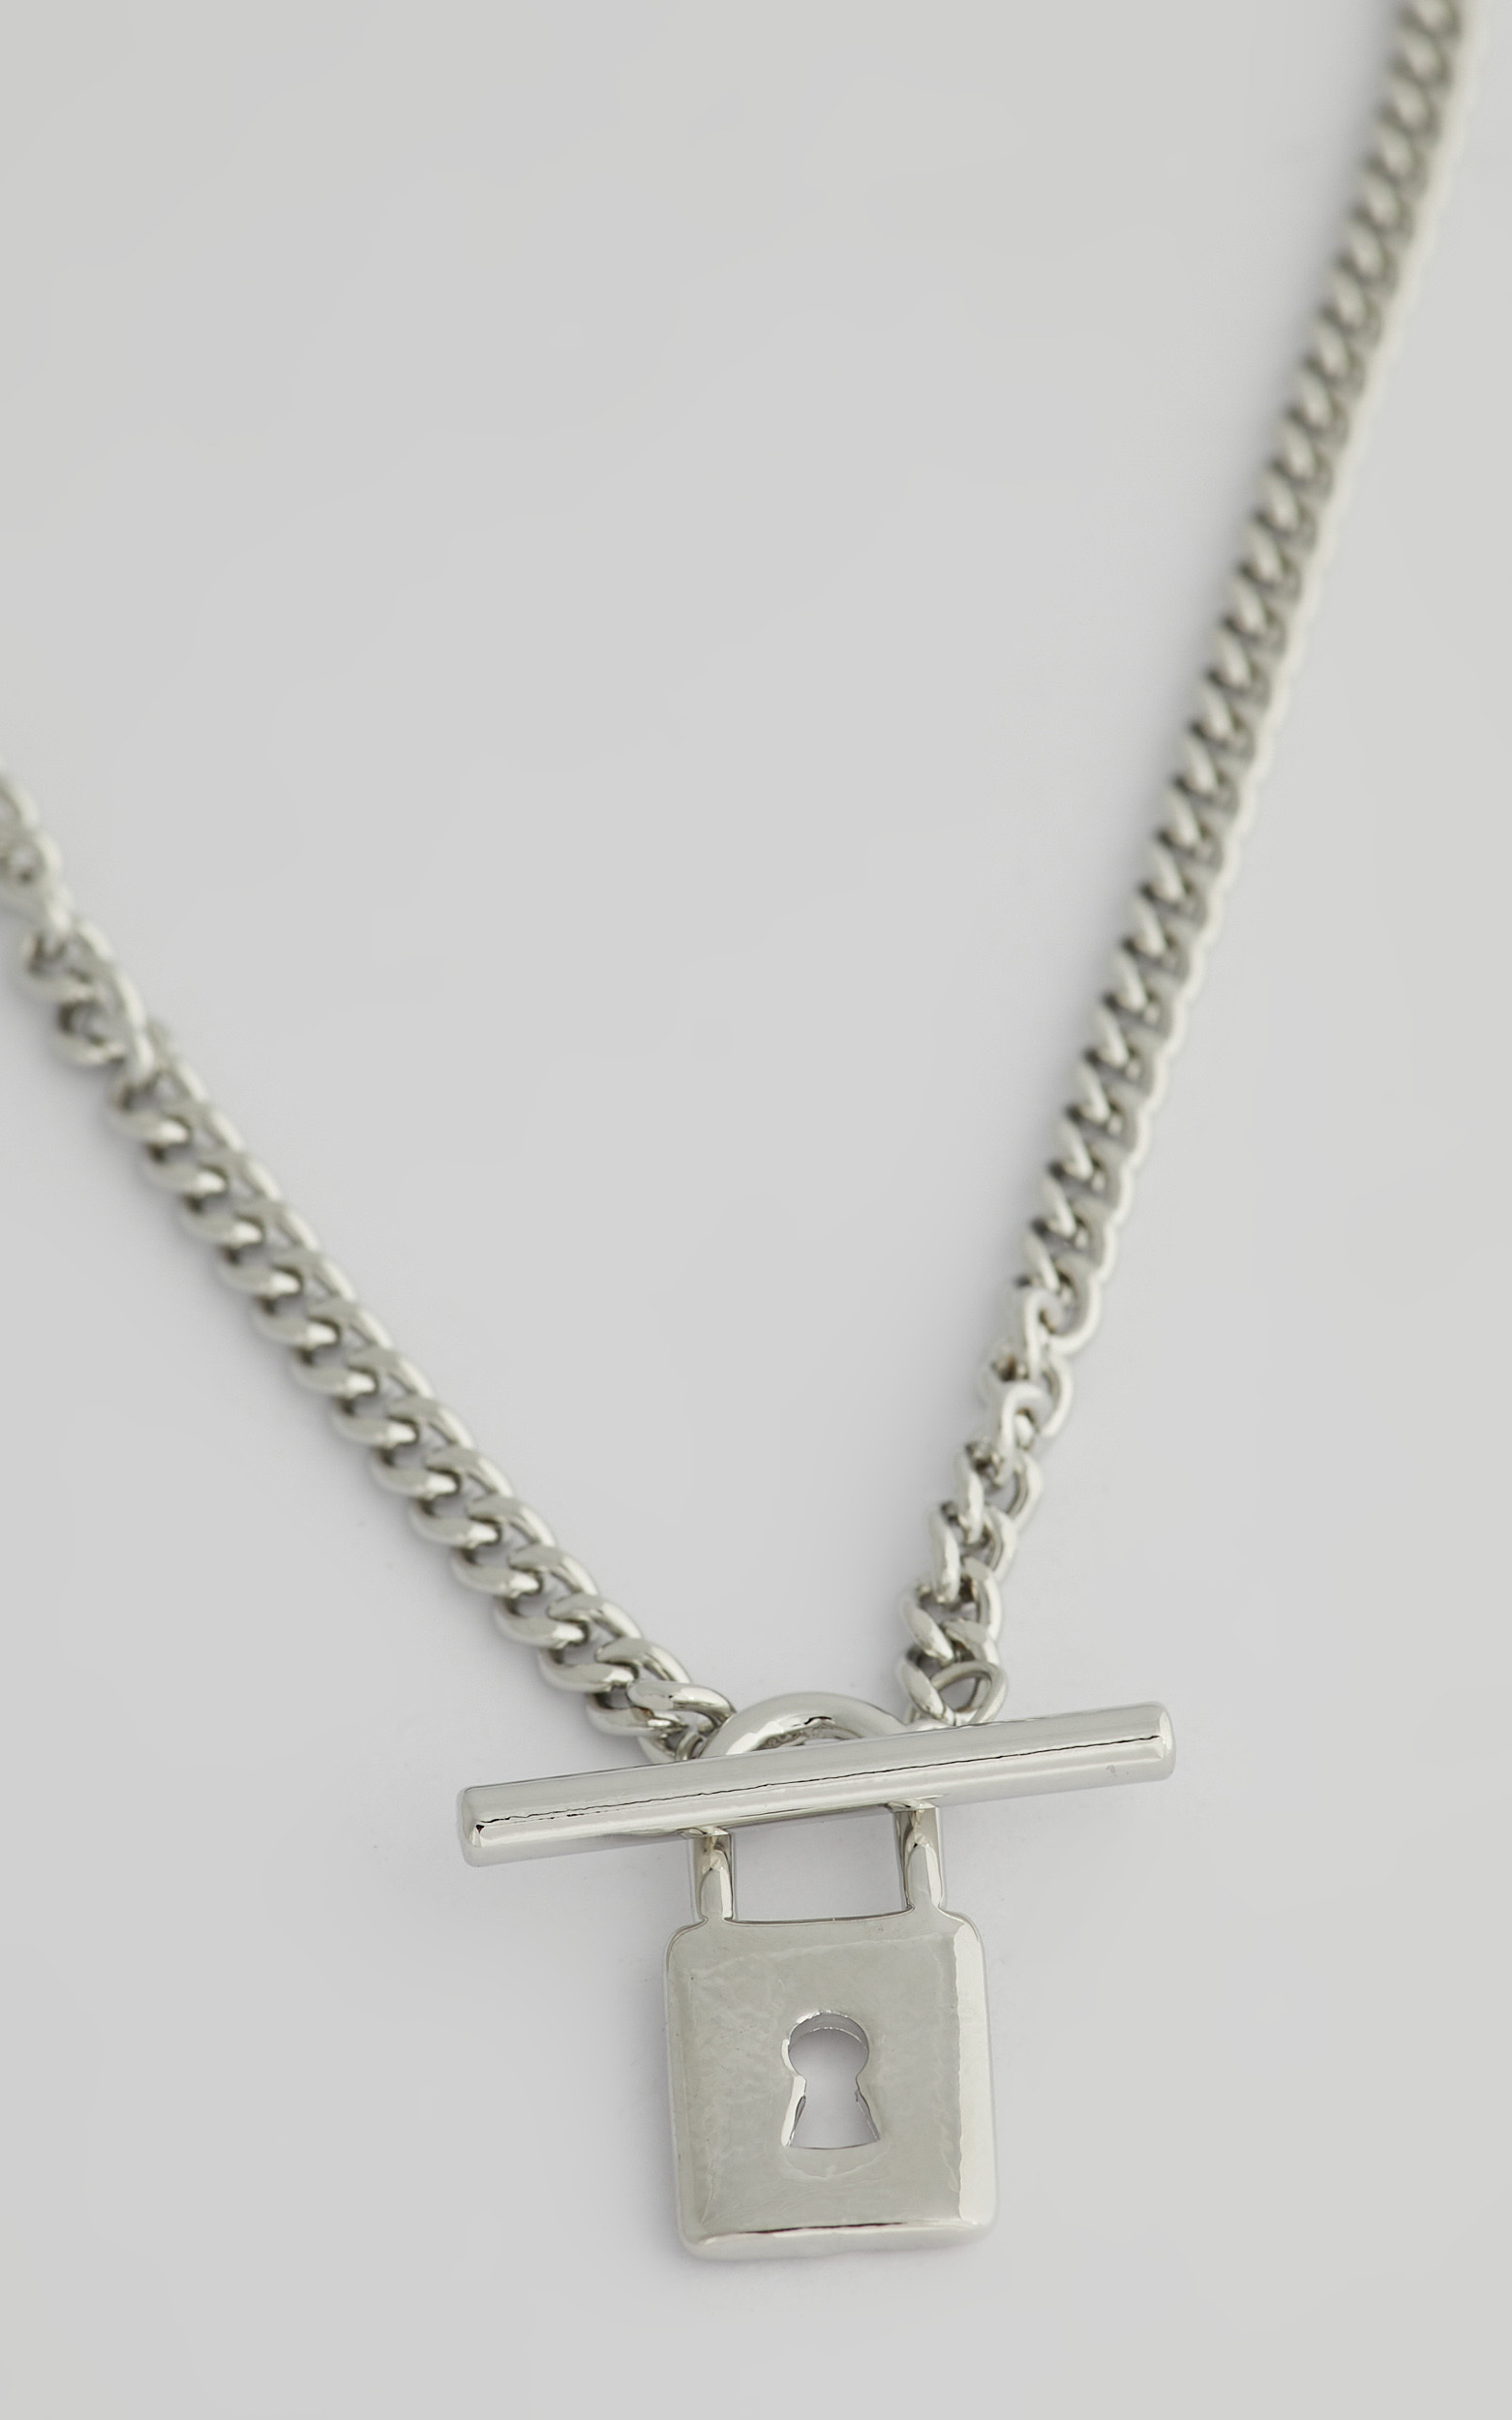 Darby Lock Necklace in Silver - NoSize, SLV1, hi-res image number null